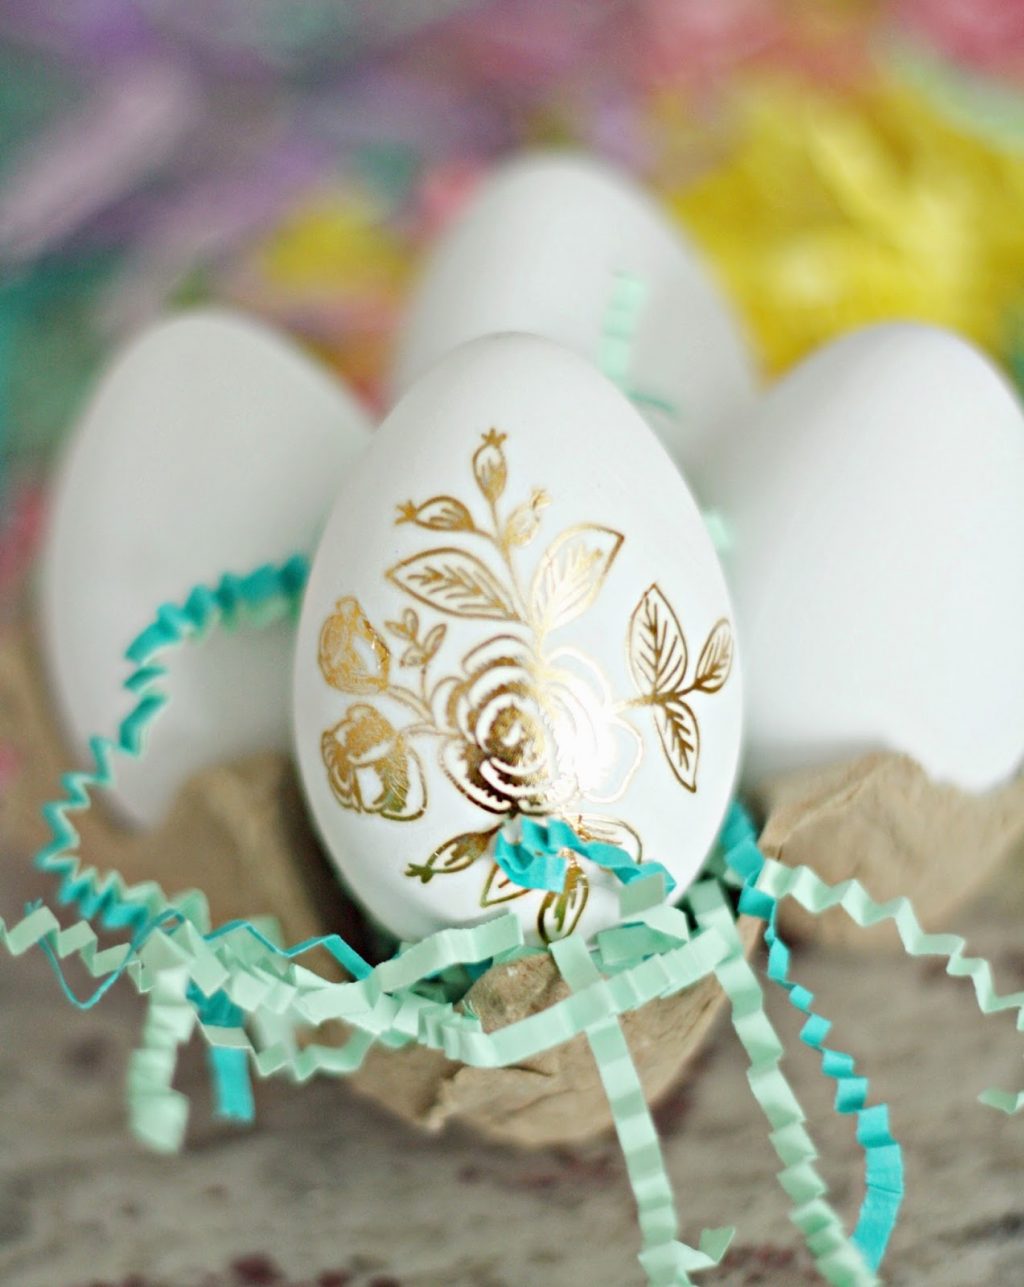 DIY Gold Foil Easter Eggs + a tutorial featured by Top US Craft Blog + The Pretty Life Girls